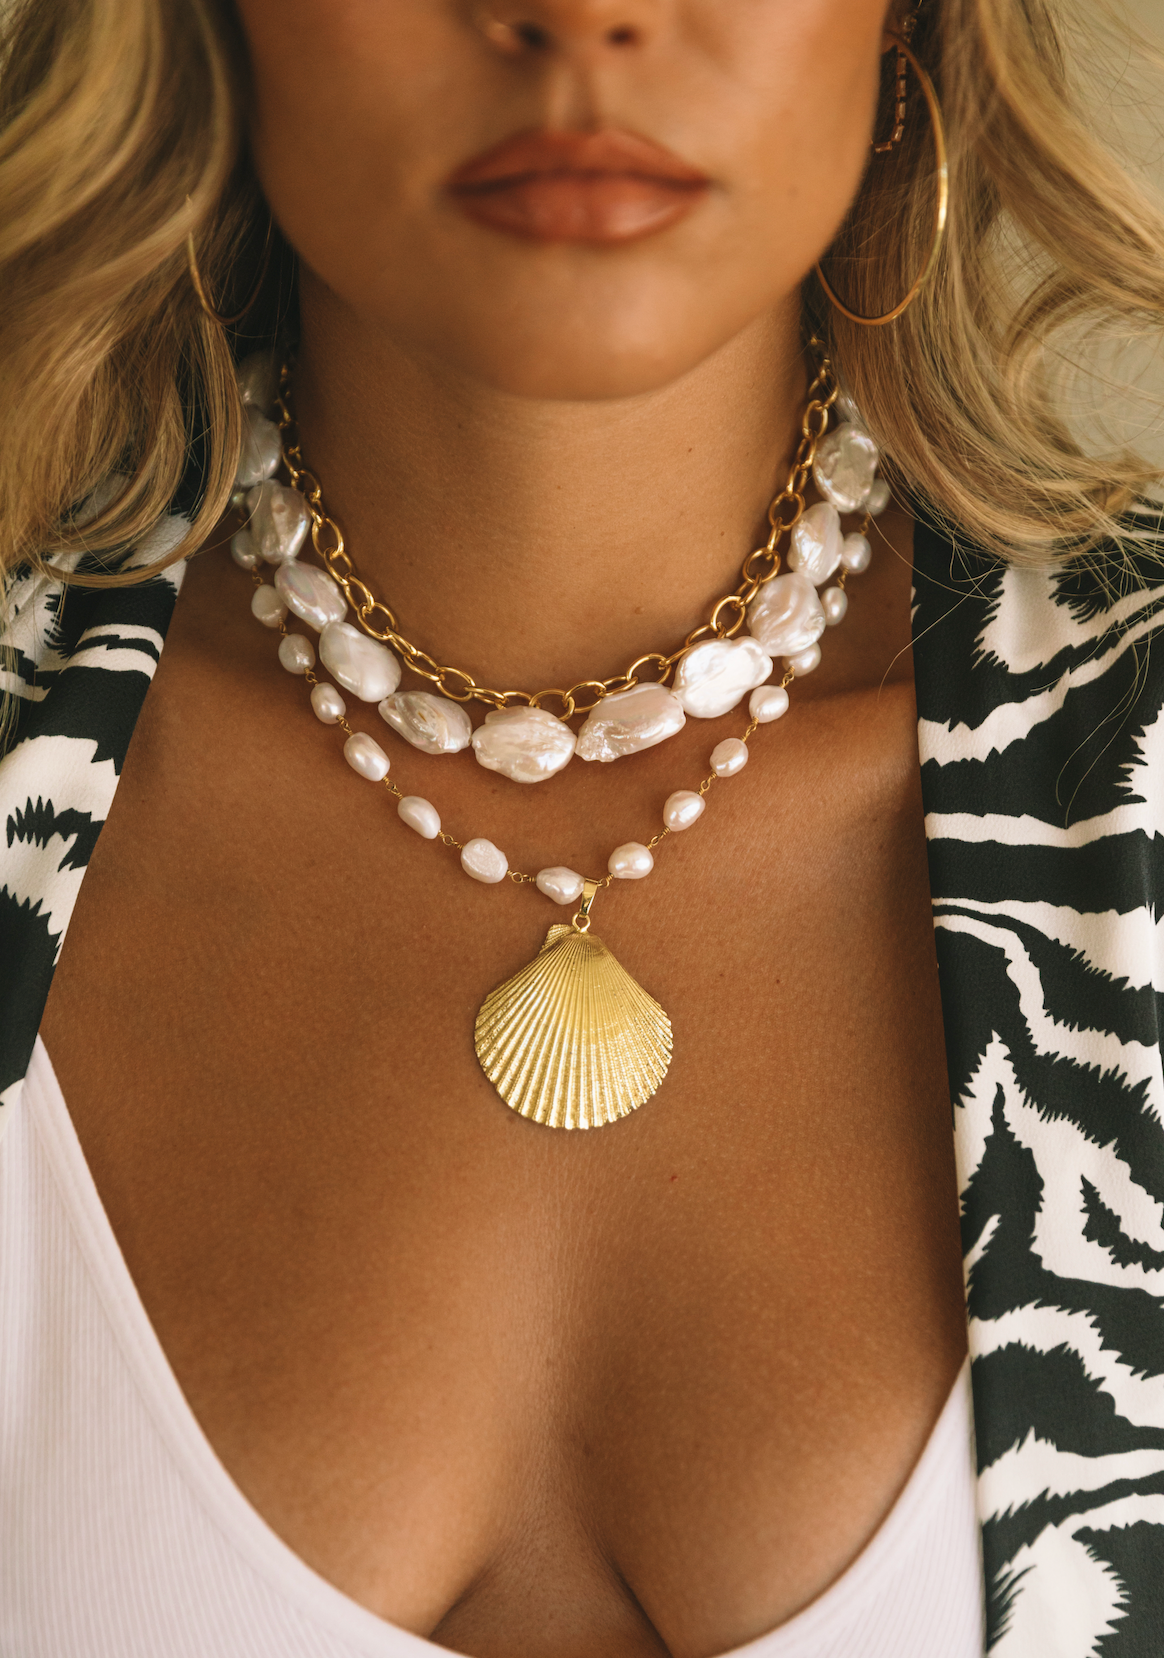 The Statement Pearl Necklace